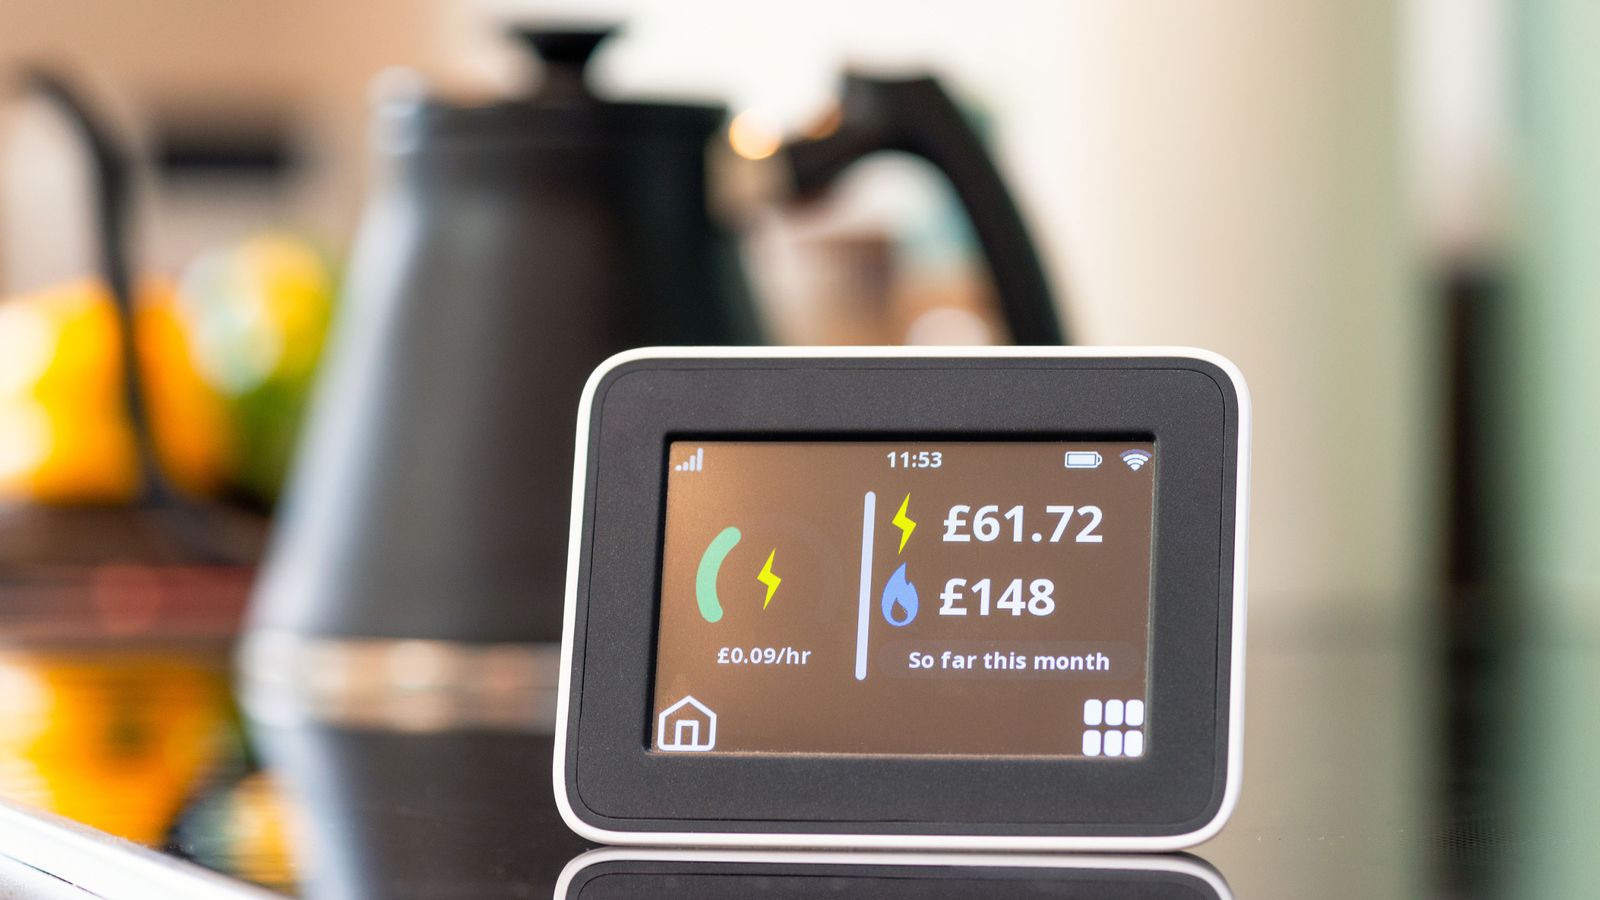 Octopus Energy pays customers more than £1m for saving energy